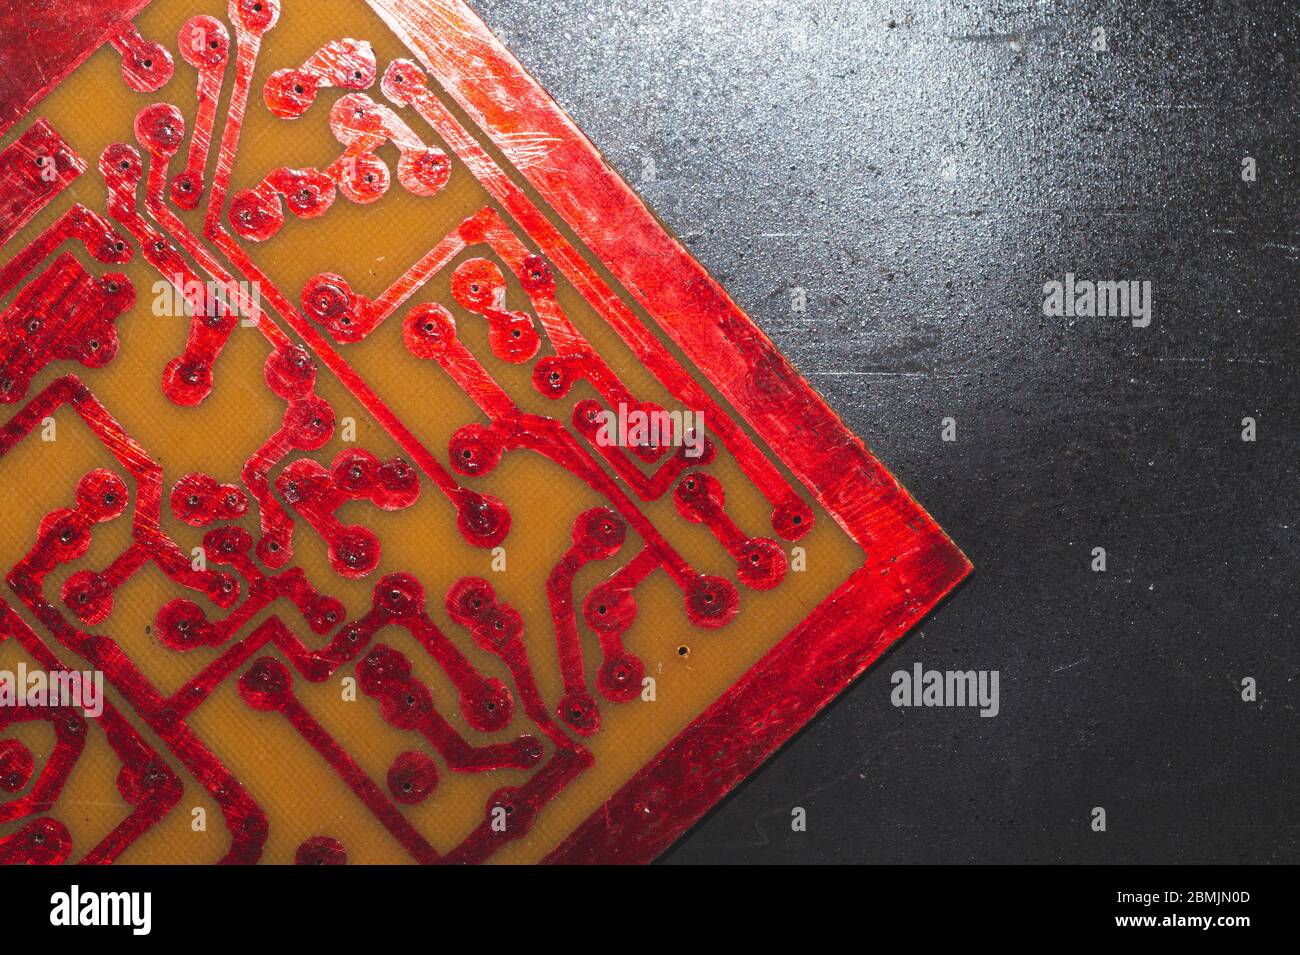 Handmade circuit board with red soldered tracks. industrial background. textolite with soldering Stock Photo